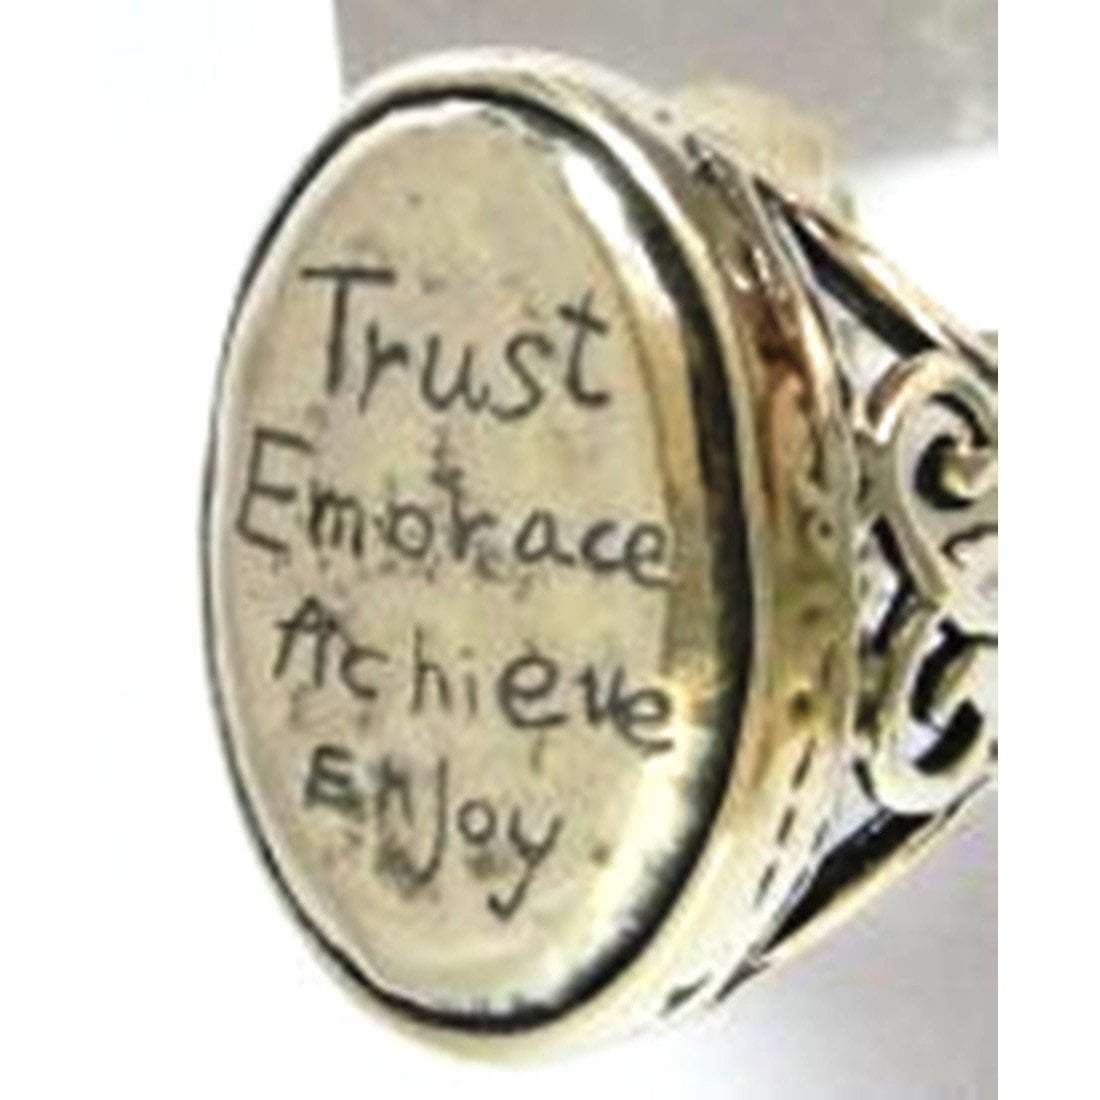 Bluenoemi Rings Silver Ring. Message Ring. English sterling silver rings. Trust Embrace Achieve Enjoy